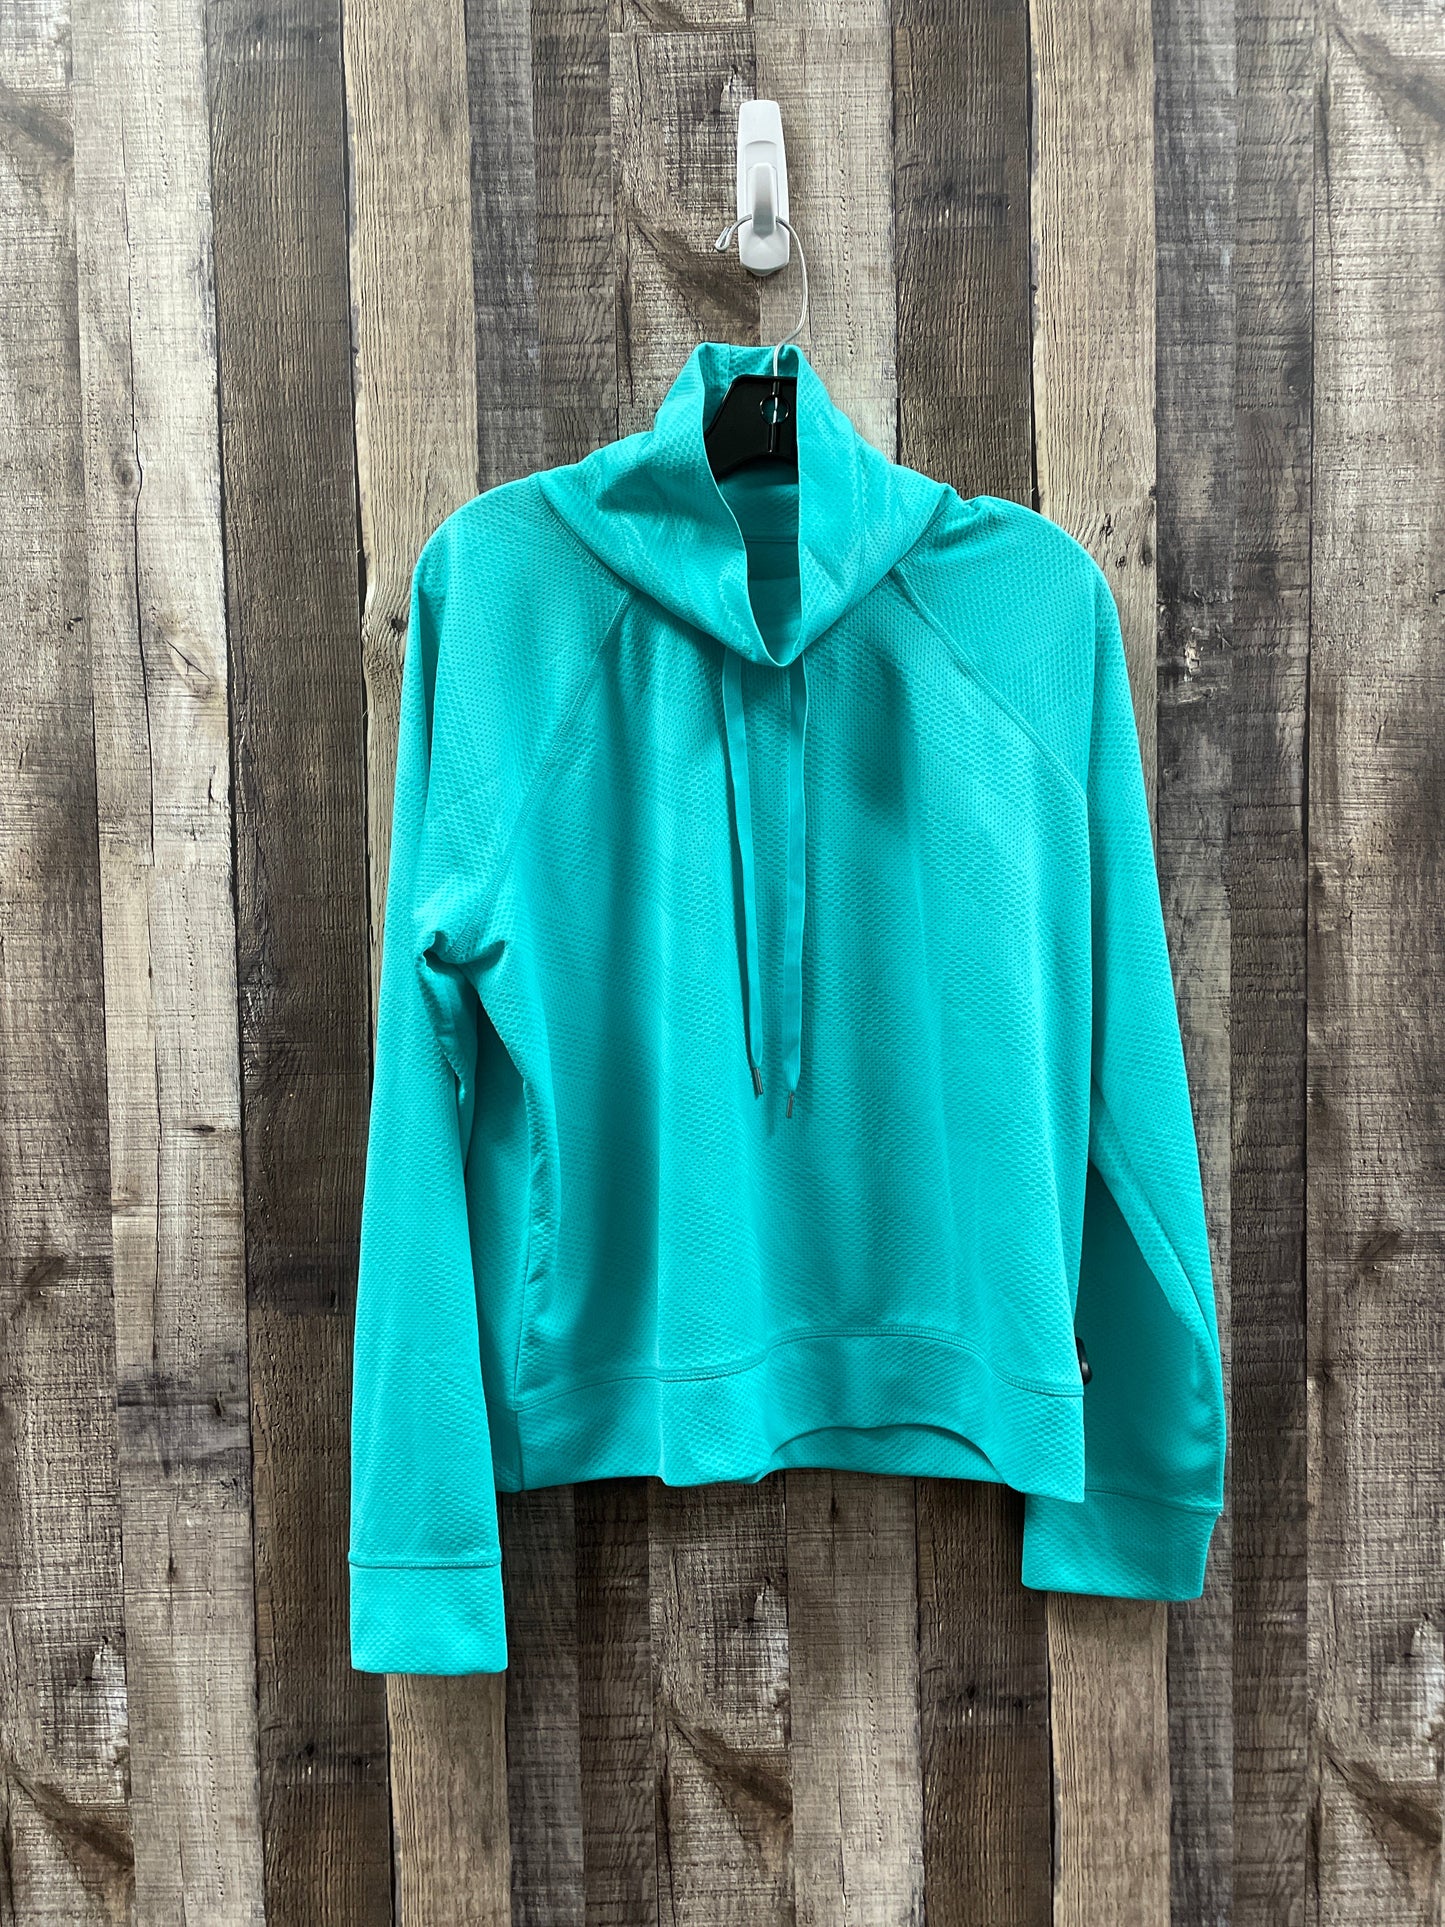 Green Athletic Top Long Sleeve Collar Xersion, Size L